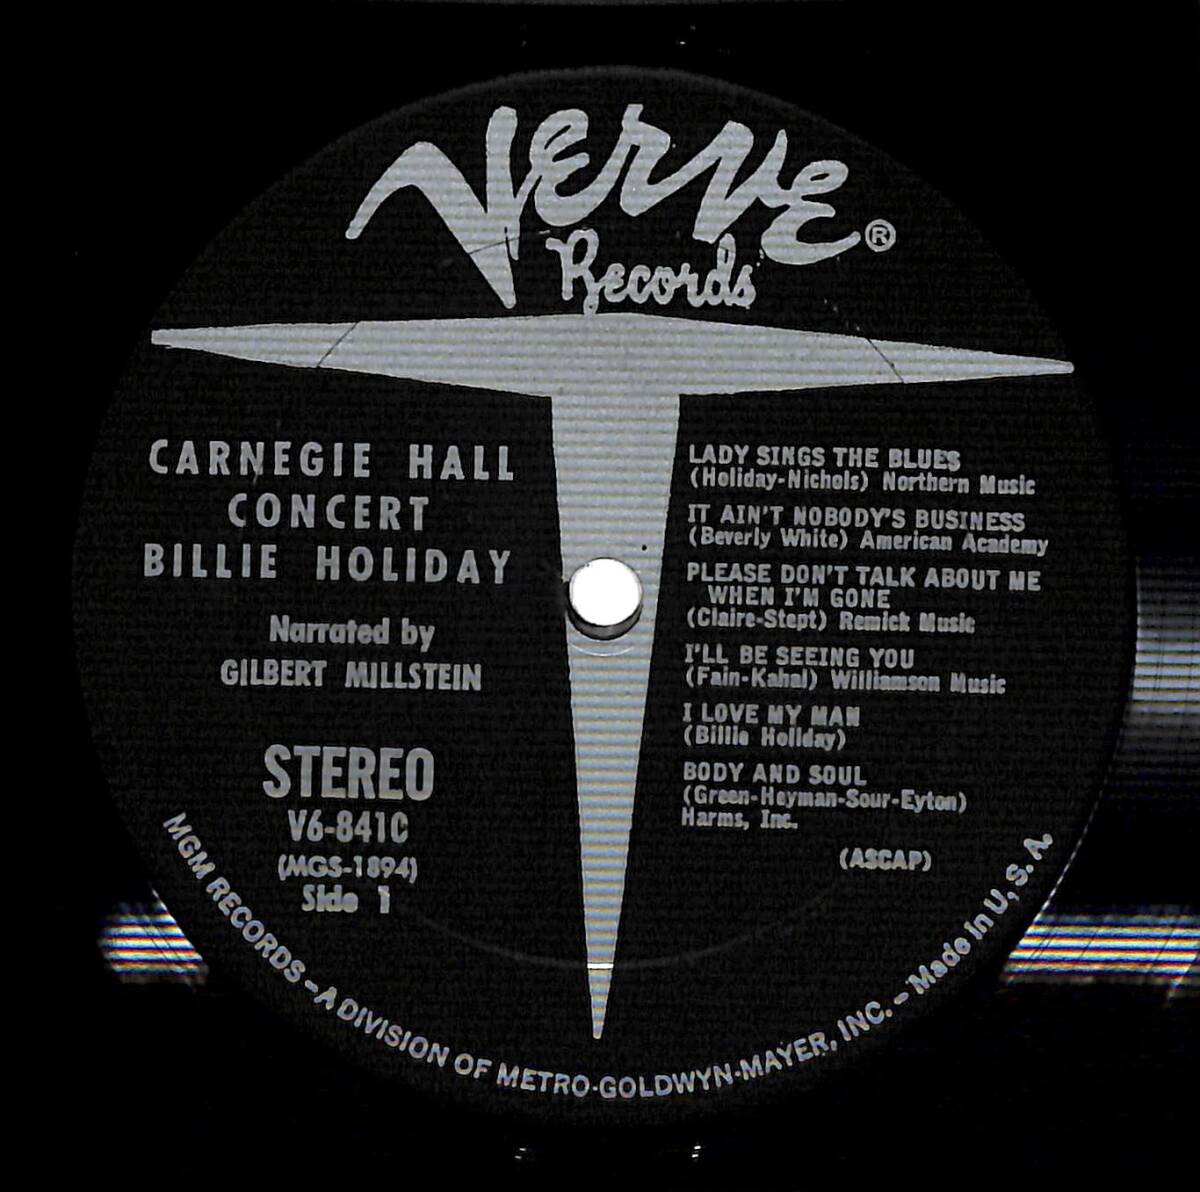 e3225/LP/米/Billie Holiday/The Essential Billie Holiday/Carnegie Hall Concertの画像3